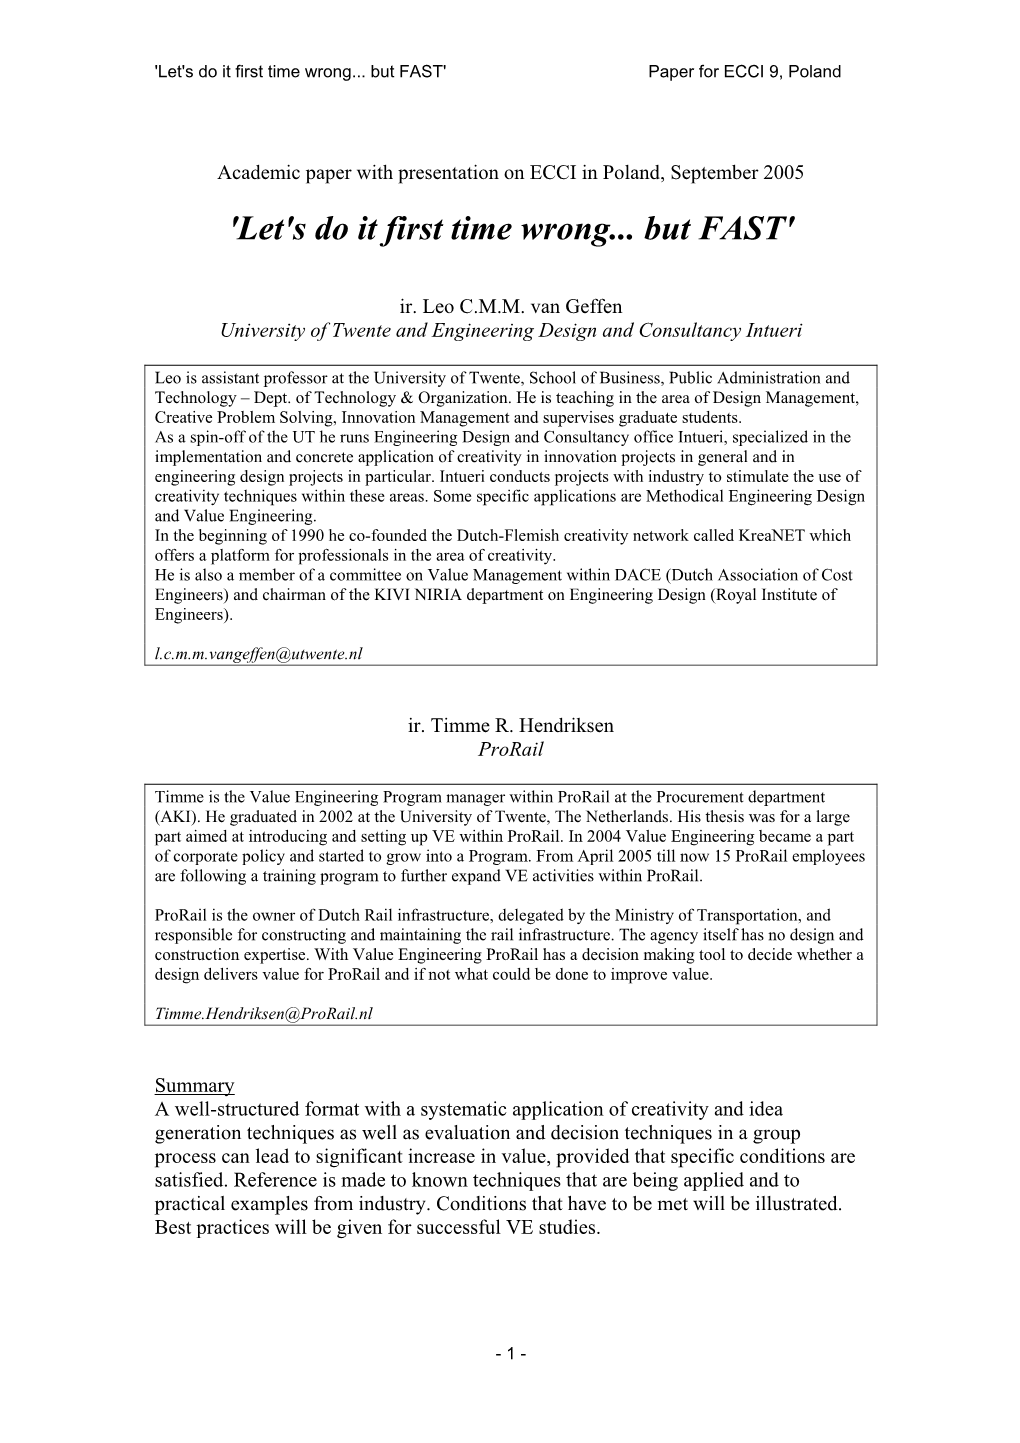 'Let's Do It First Time Wrong... but FAST' Paper for ECCI 9, Poland